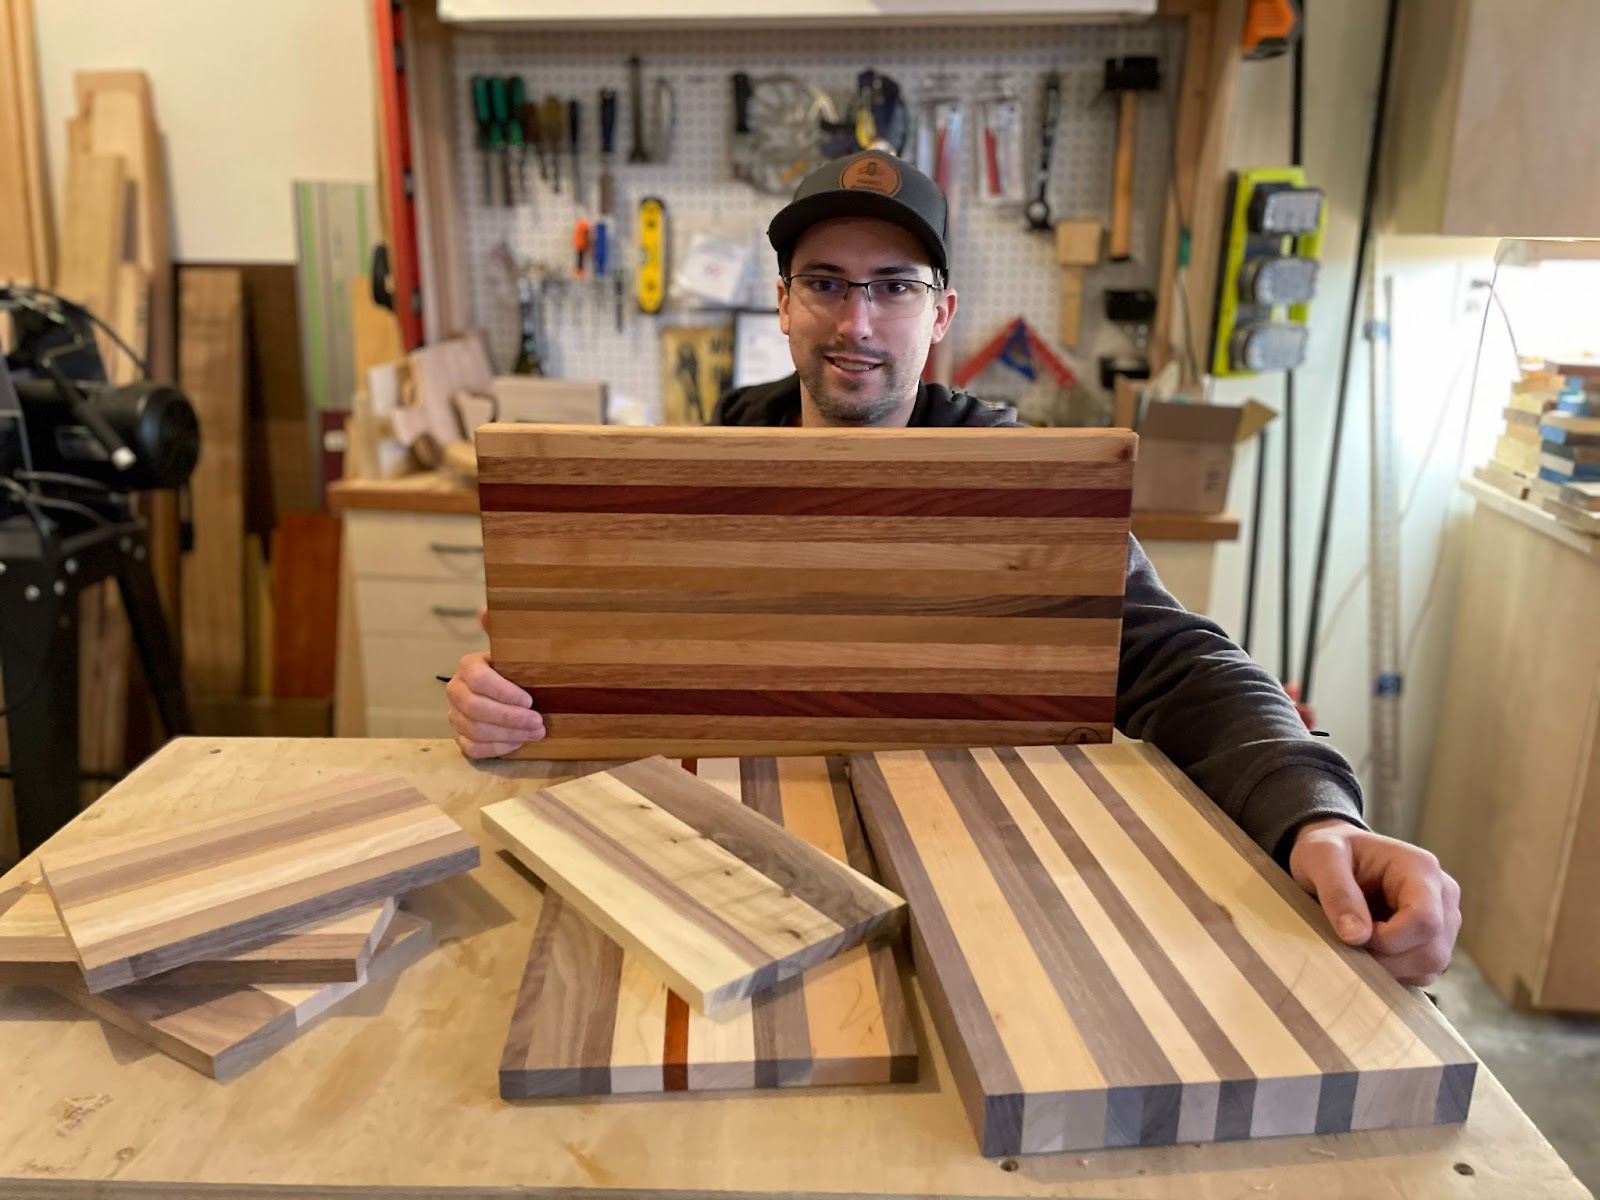 How to finish a cutting board + extra tips - Gearheart Industry